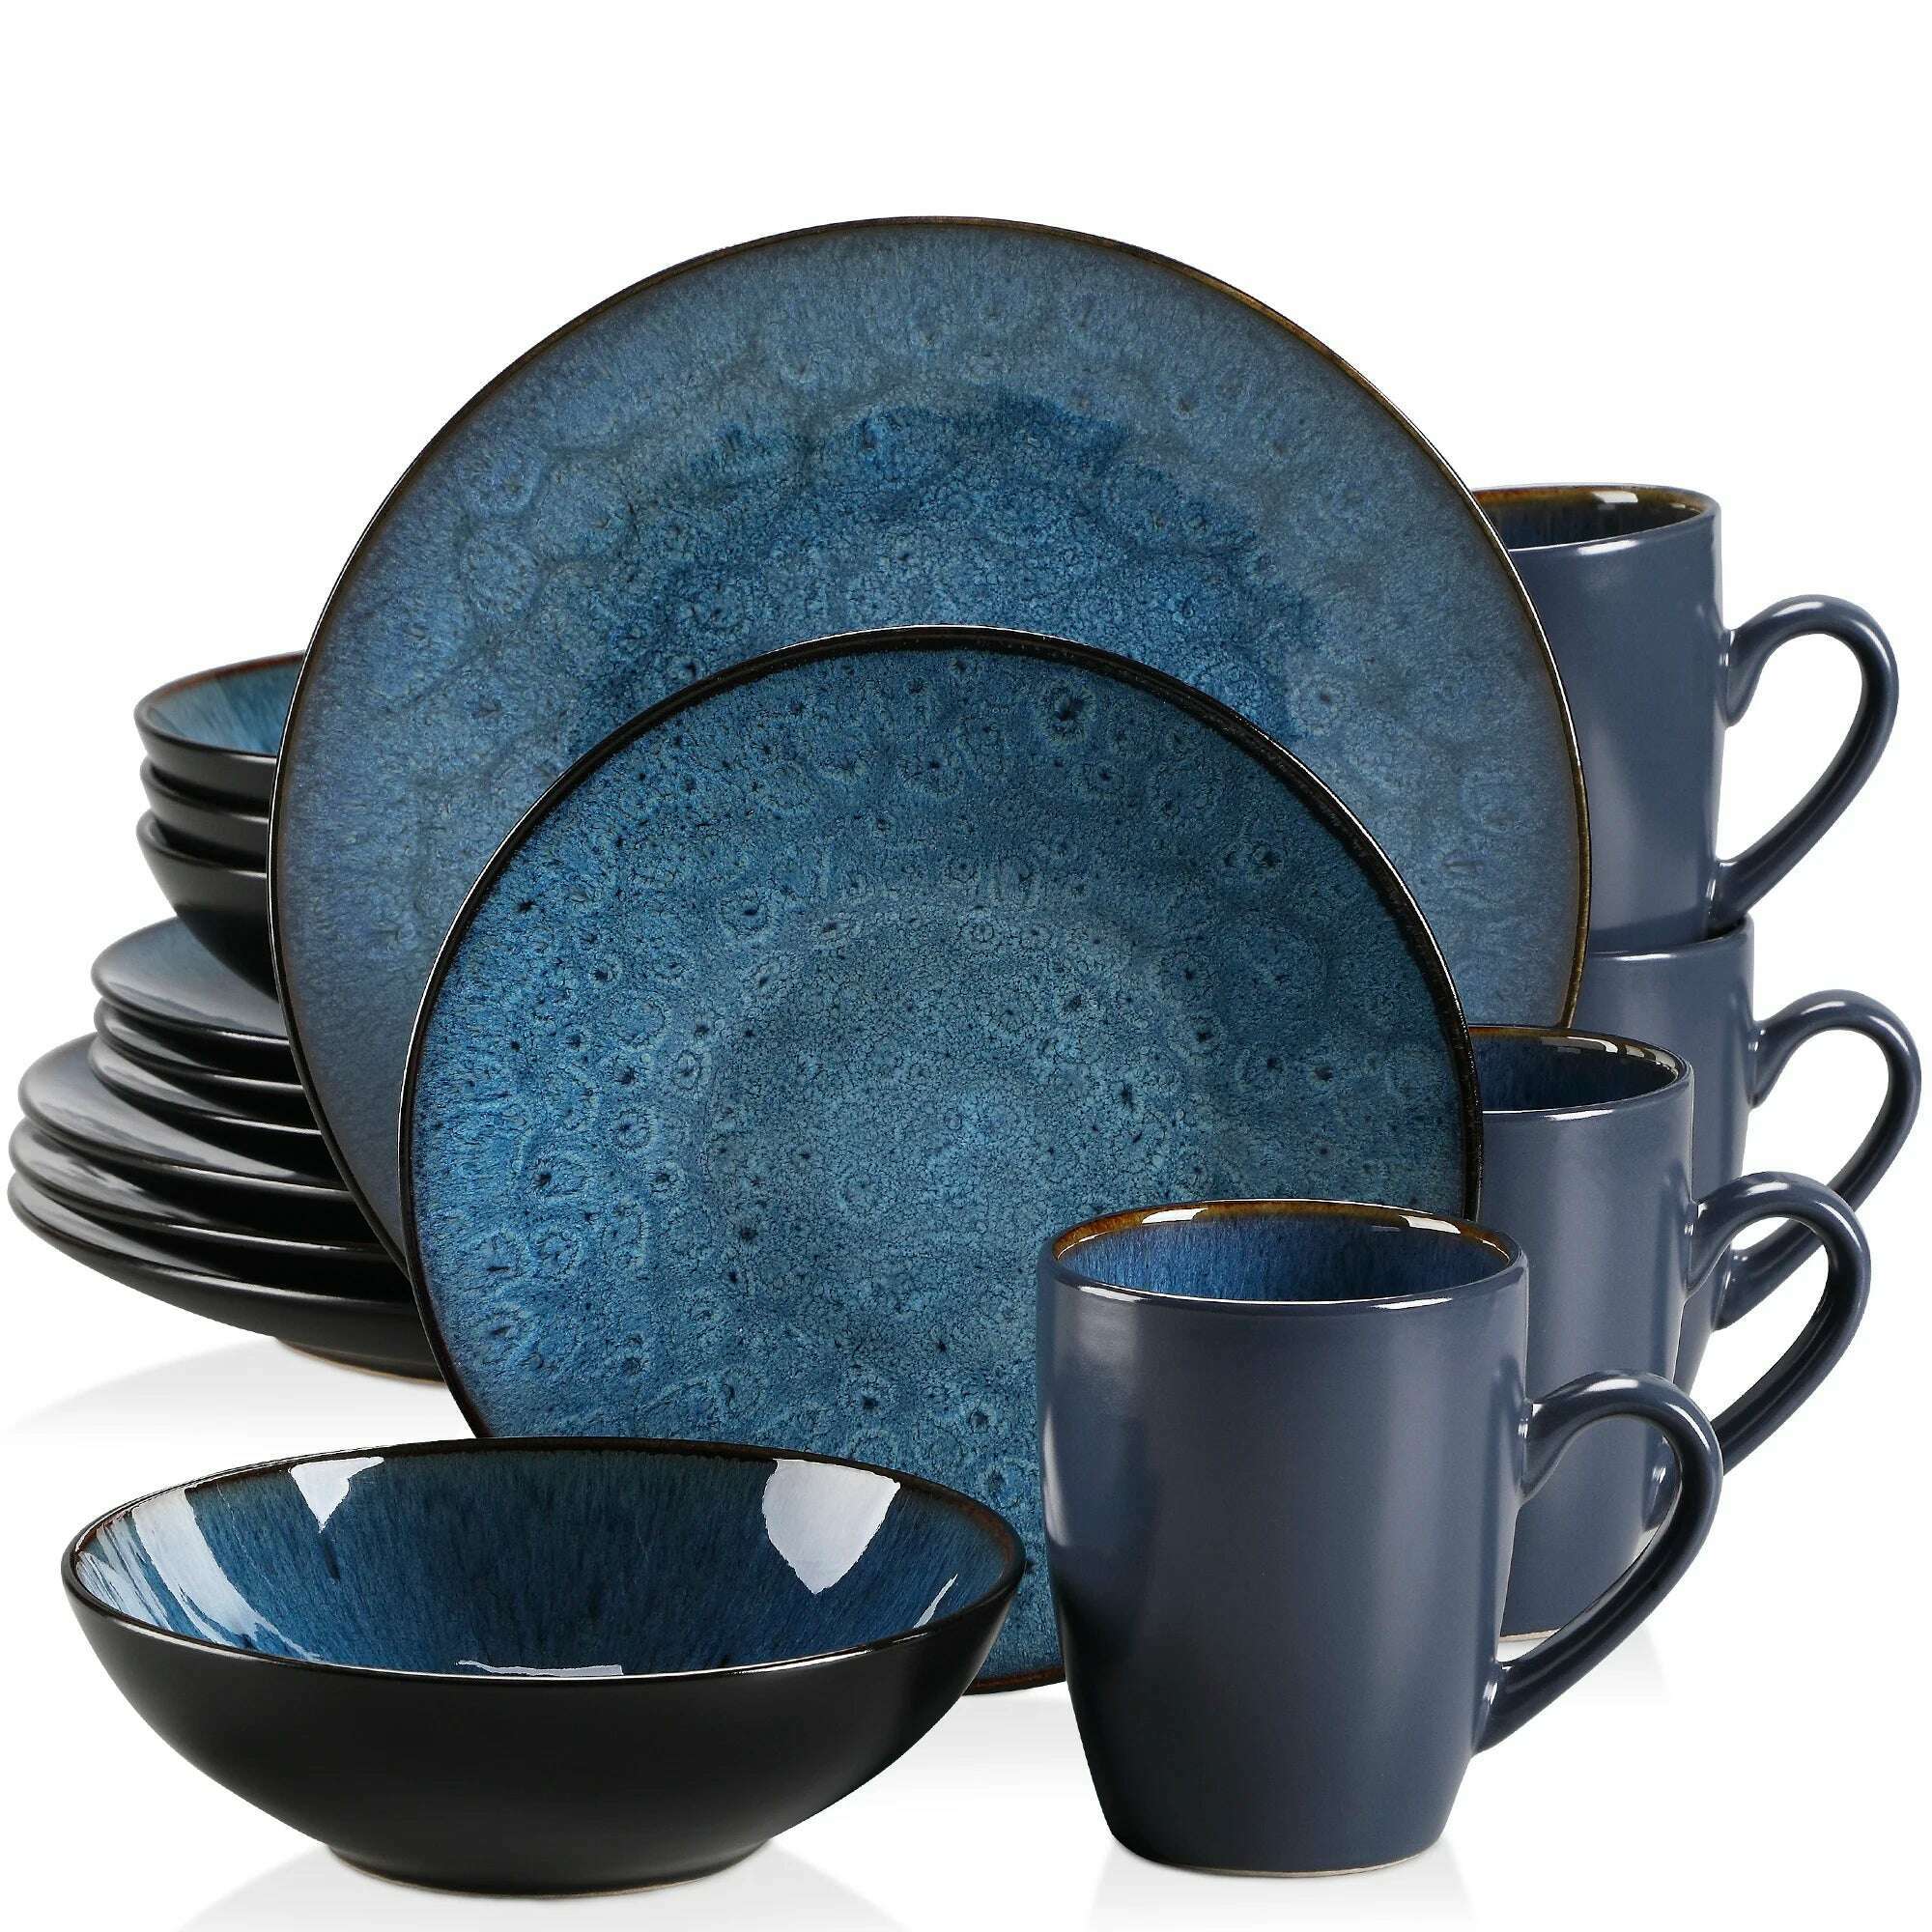 KIMLUD, VANCASSO BUBBLE 16/32/48-Piece Tableware Set Vintage Ceramic Blue/Brown Stoneware Set with Dinner&Dessert Plate,Bowl,Coffee Cups, Blue-16-Piece / GERMANY, KIMLUD Womens Clothes